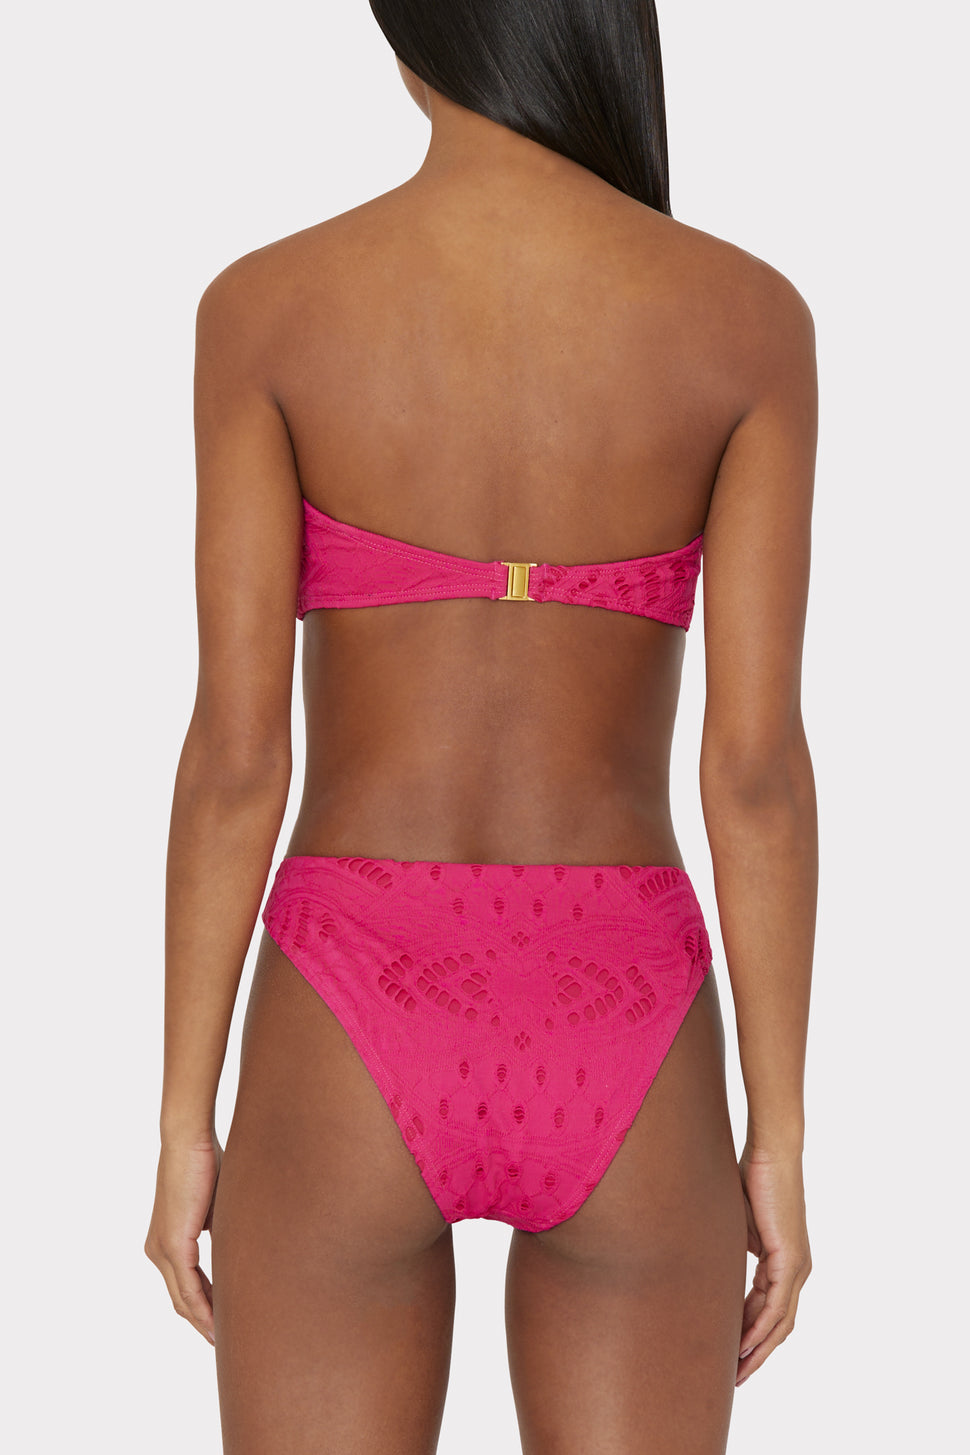 Bikini | In Top in Pink Pink Eyelet - MILLY Bandeau Lace MILLY